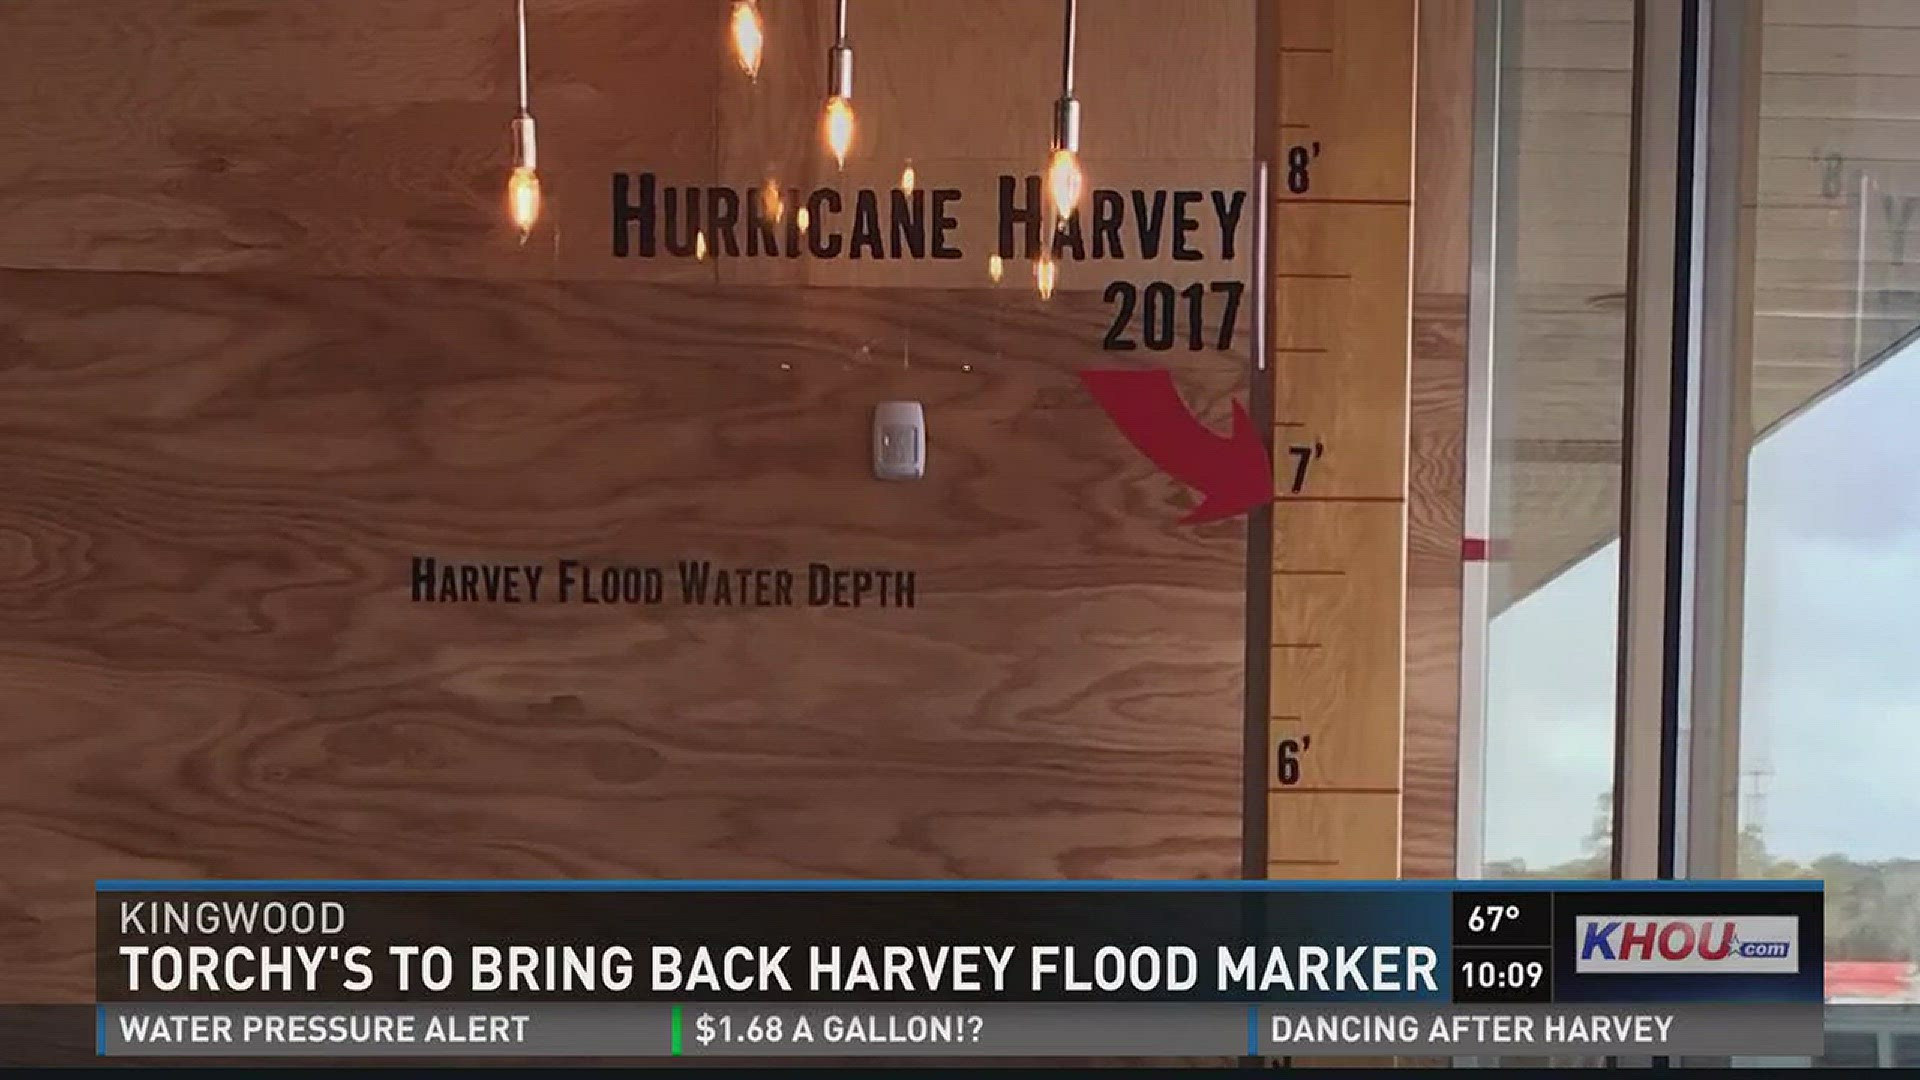 A flood gage installed inside a Kingwood Torchy's Tacos to memorialize Hurricane Harvey turned into a point of pride for the local community, which is why when the restaurant abruptly removed it, patrons took offense.